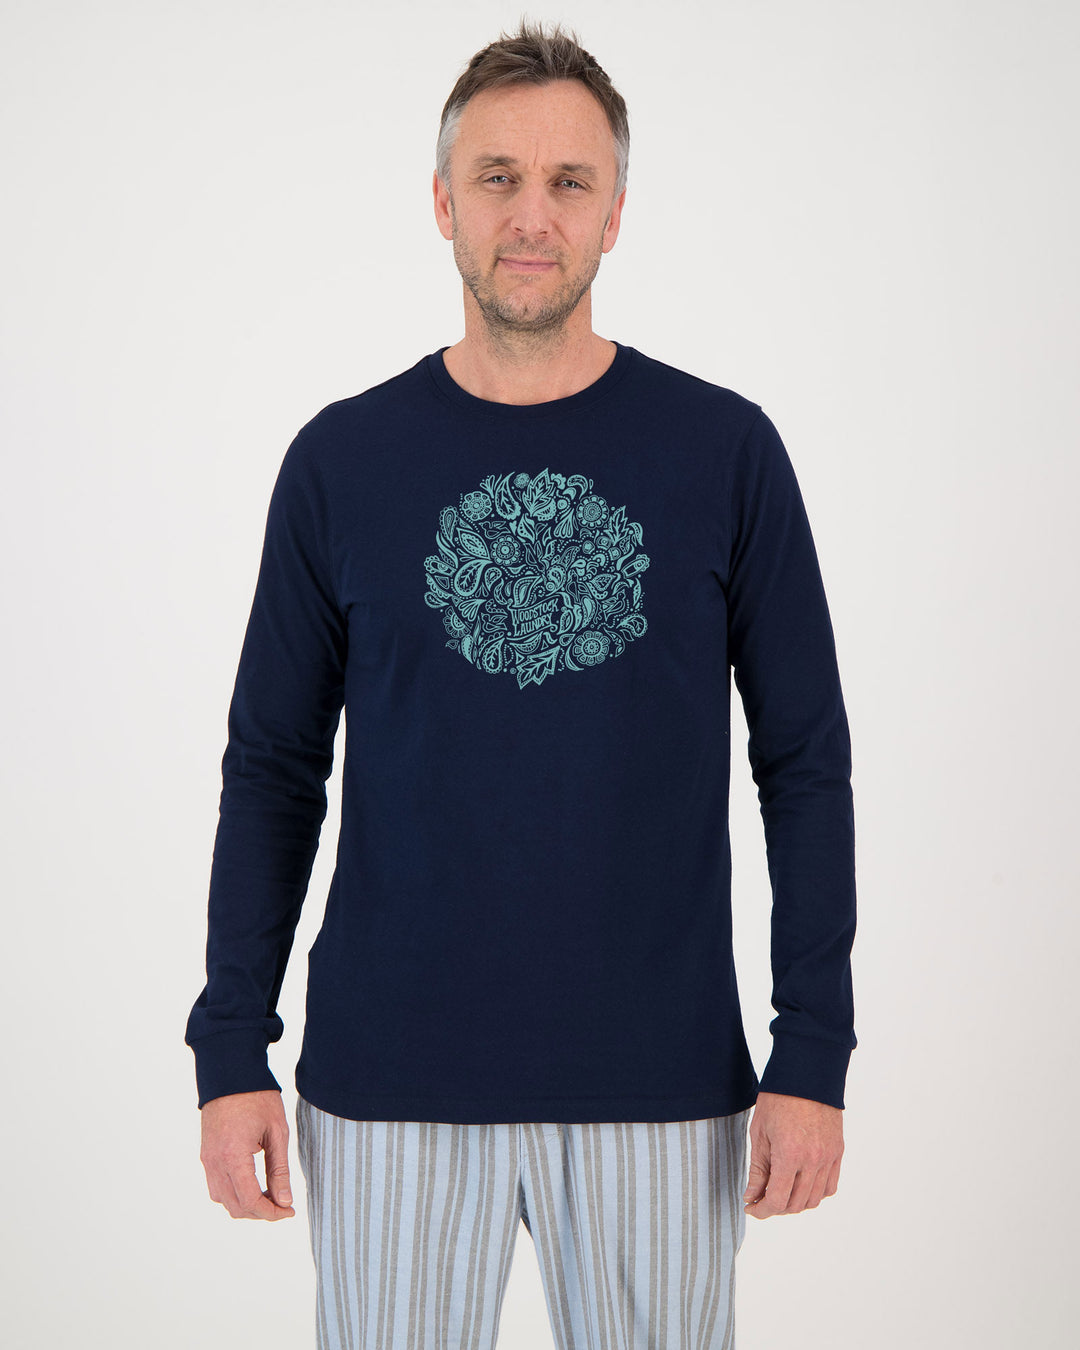 Mens Long-Sleeve Navy T-Shirt Suzie Q Teal Front - Woodstock Laundry